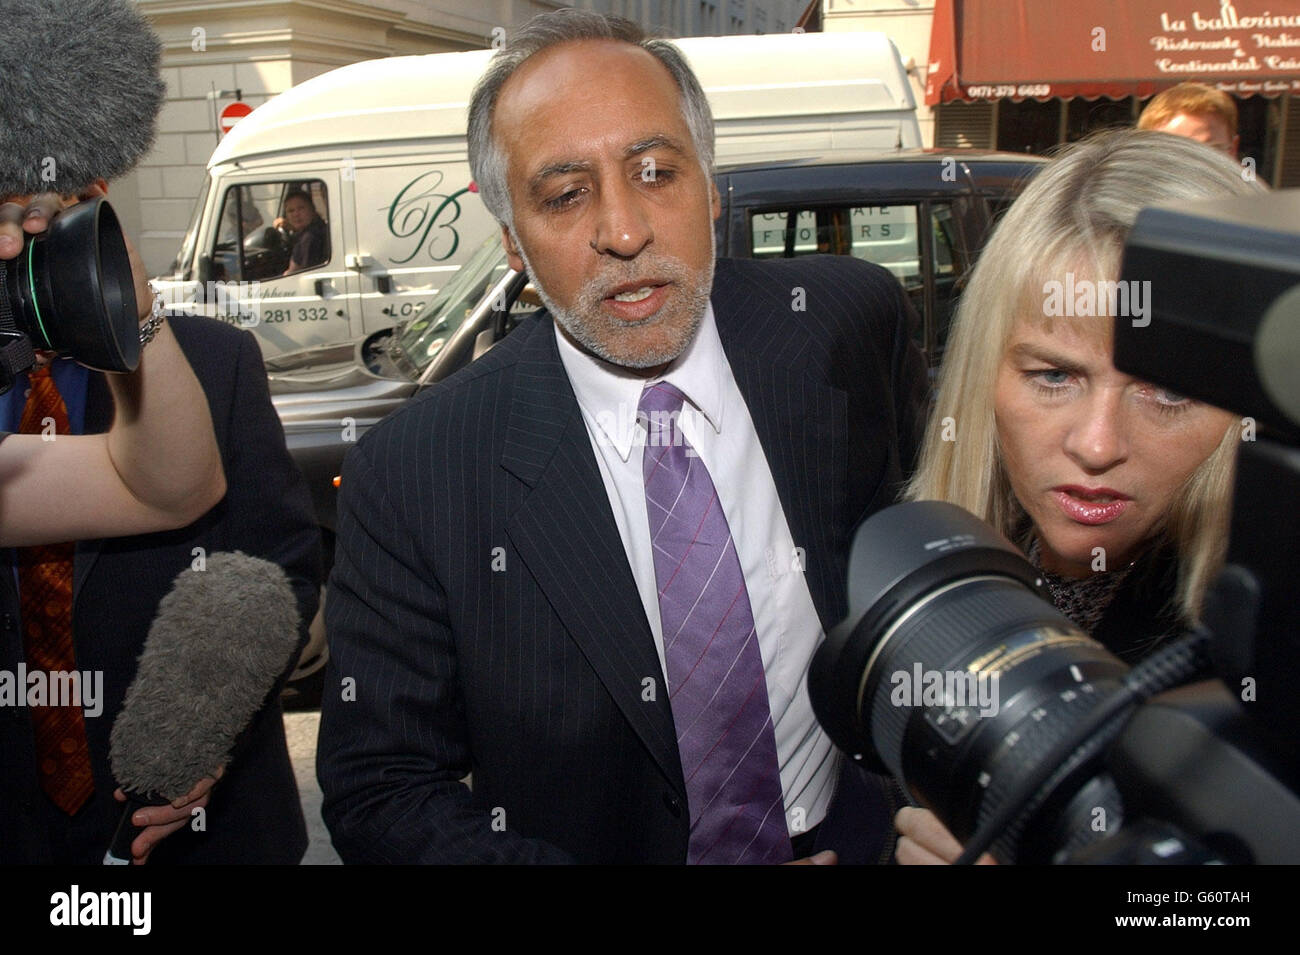 Gurbux Singh, 51, the chairman of the Commission for Racial Equality, arrives at Bow Street Magistrates Court in London where he pleaded guilty to threatening behaviour following an incident outside Lord's cricket ground. *Mr Singh was arrested following a confrontation with police after watching India beat England with three balls to spare in the one-day cricket international on July 13. His lawyer said Singh would be resigning his position at the CRE. Stock Photo